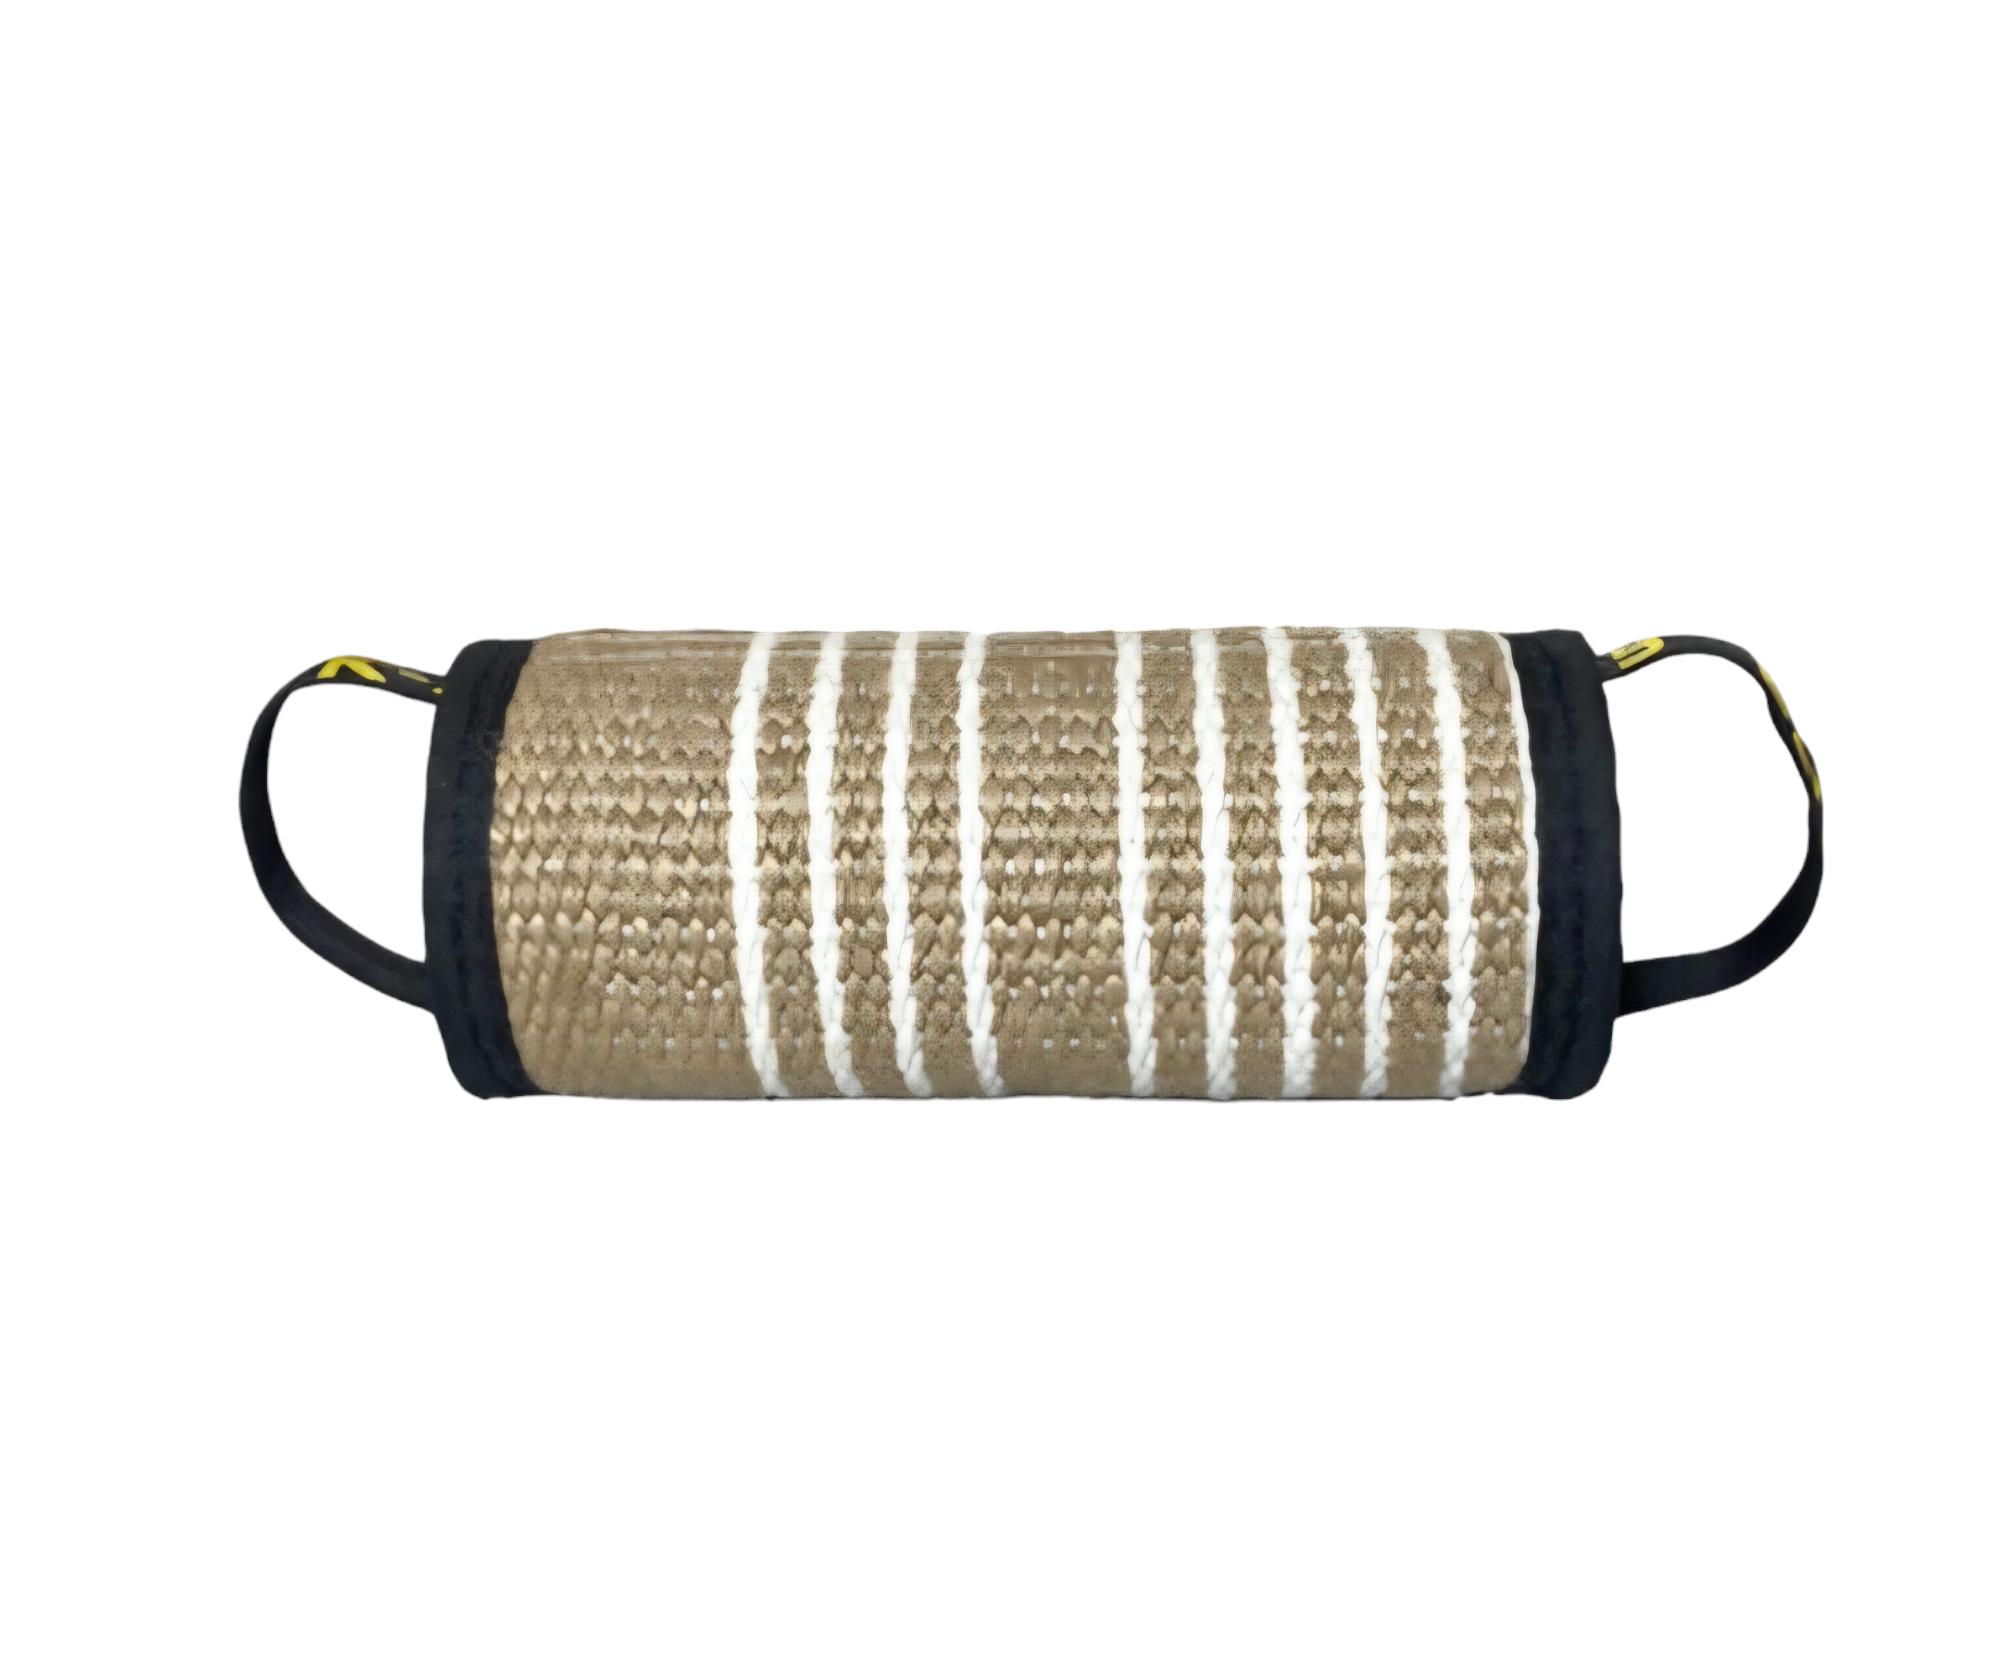 Two Handle Jute Bite Roll 12 inches